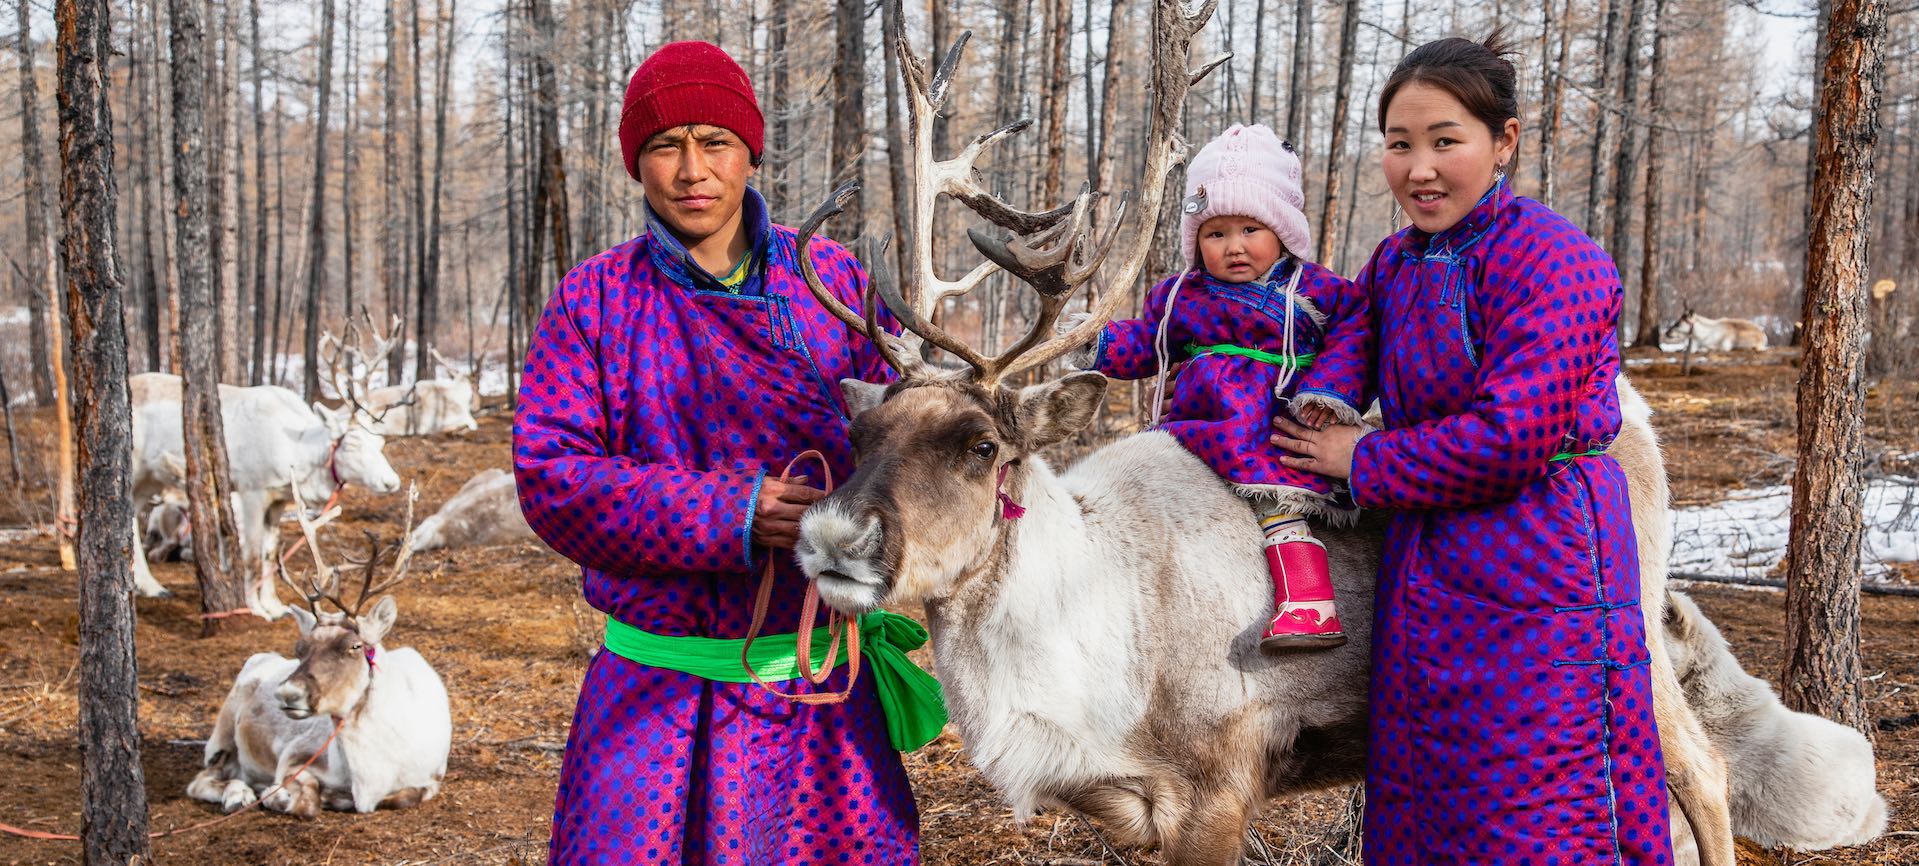 A Tsaatan herder family together with their reindeer